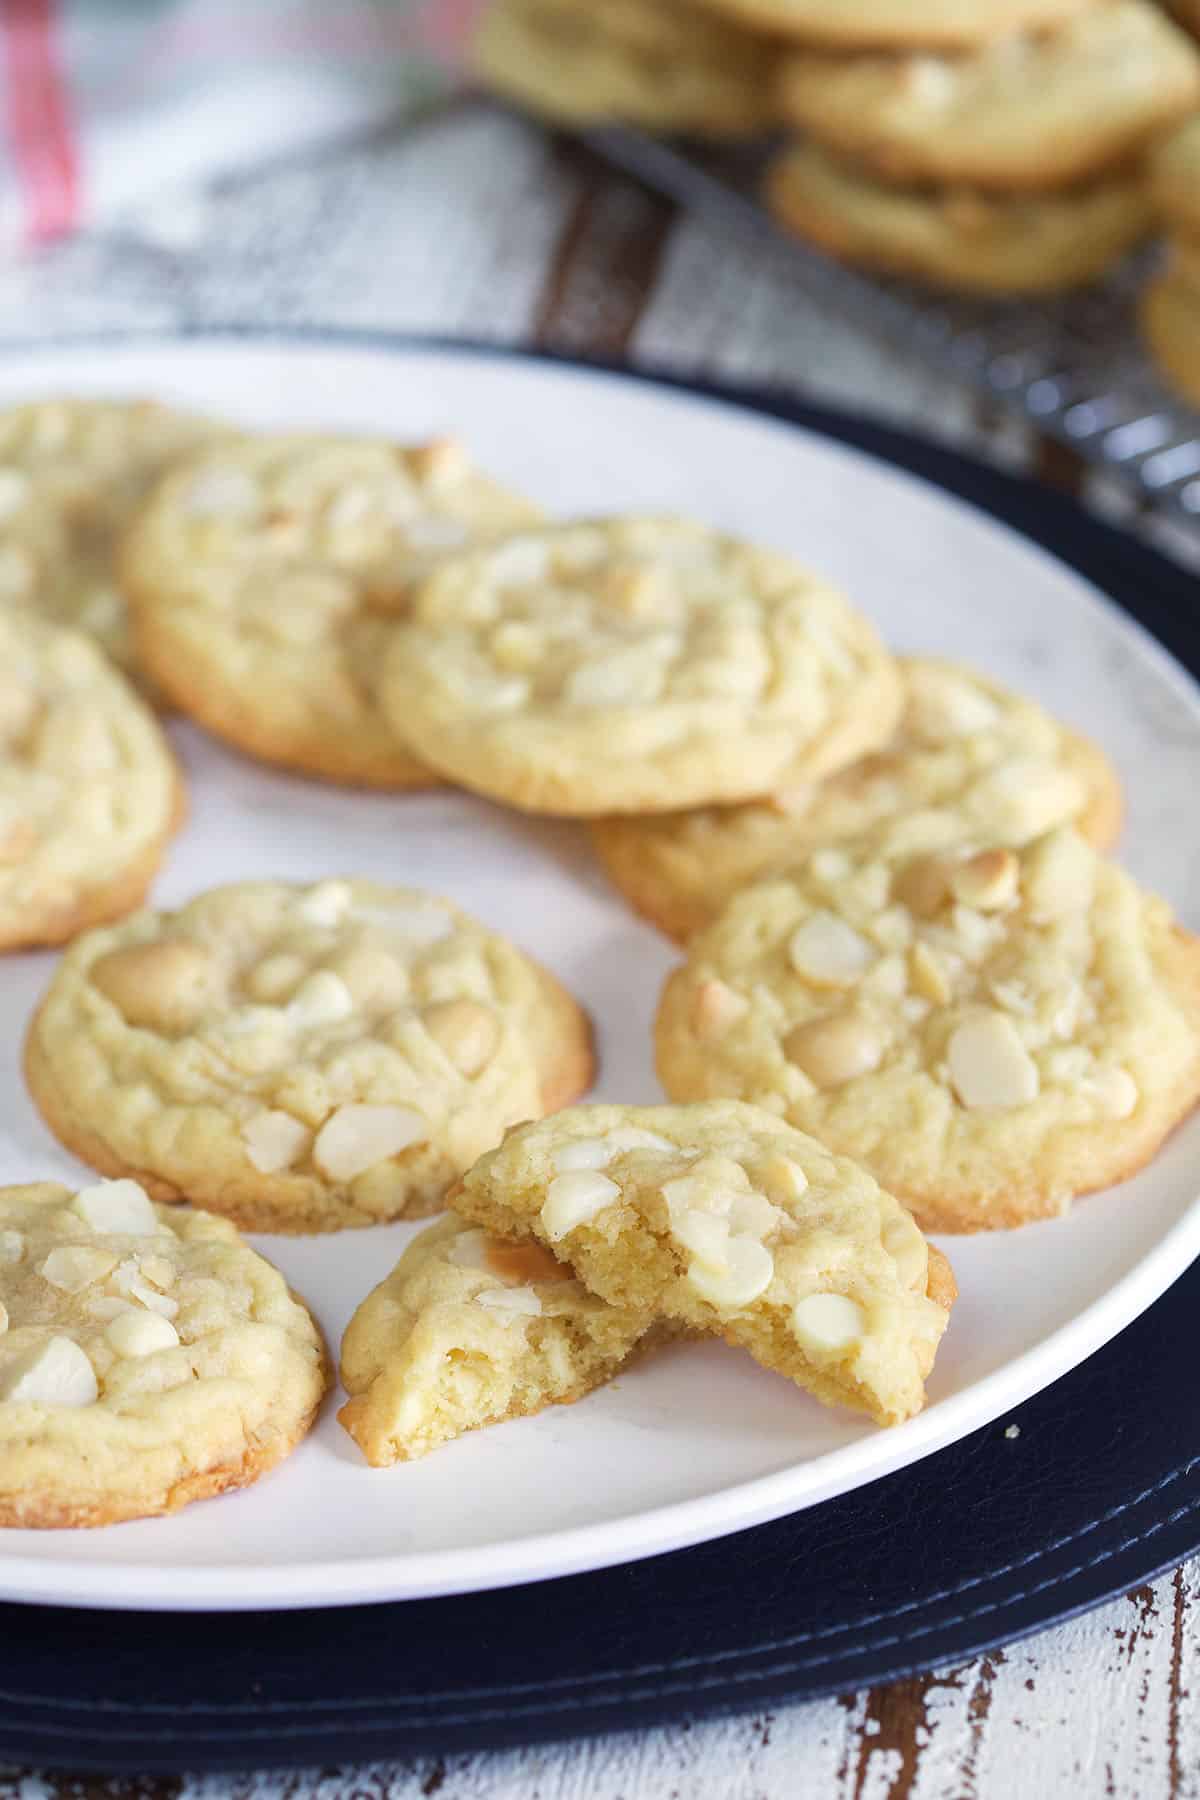 A batch of white chocolate macadamia nut cookies are presented on a white plate.